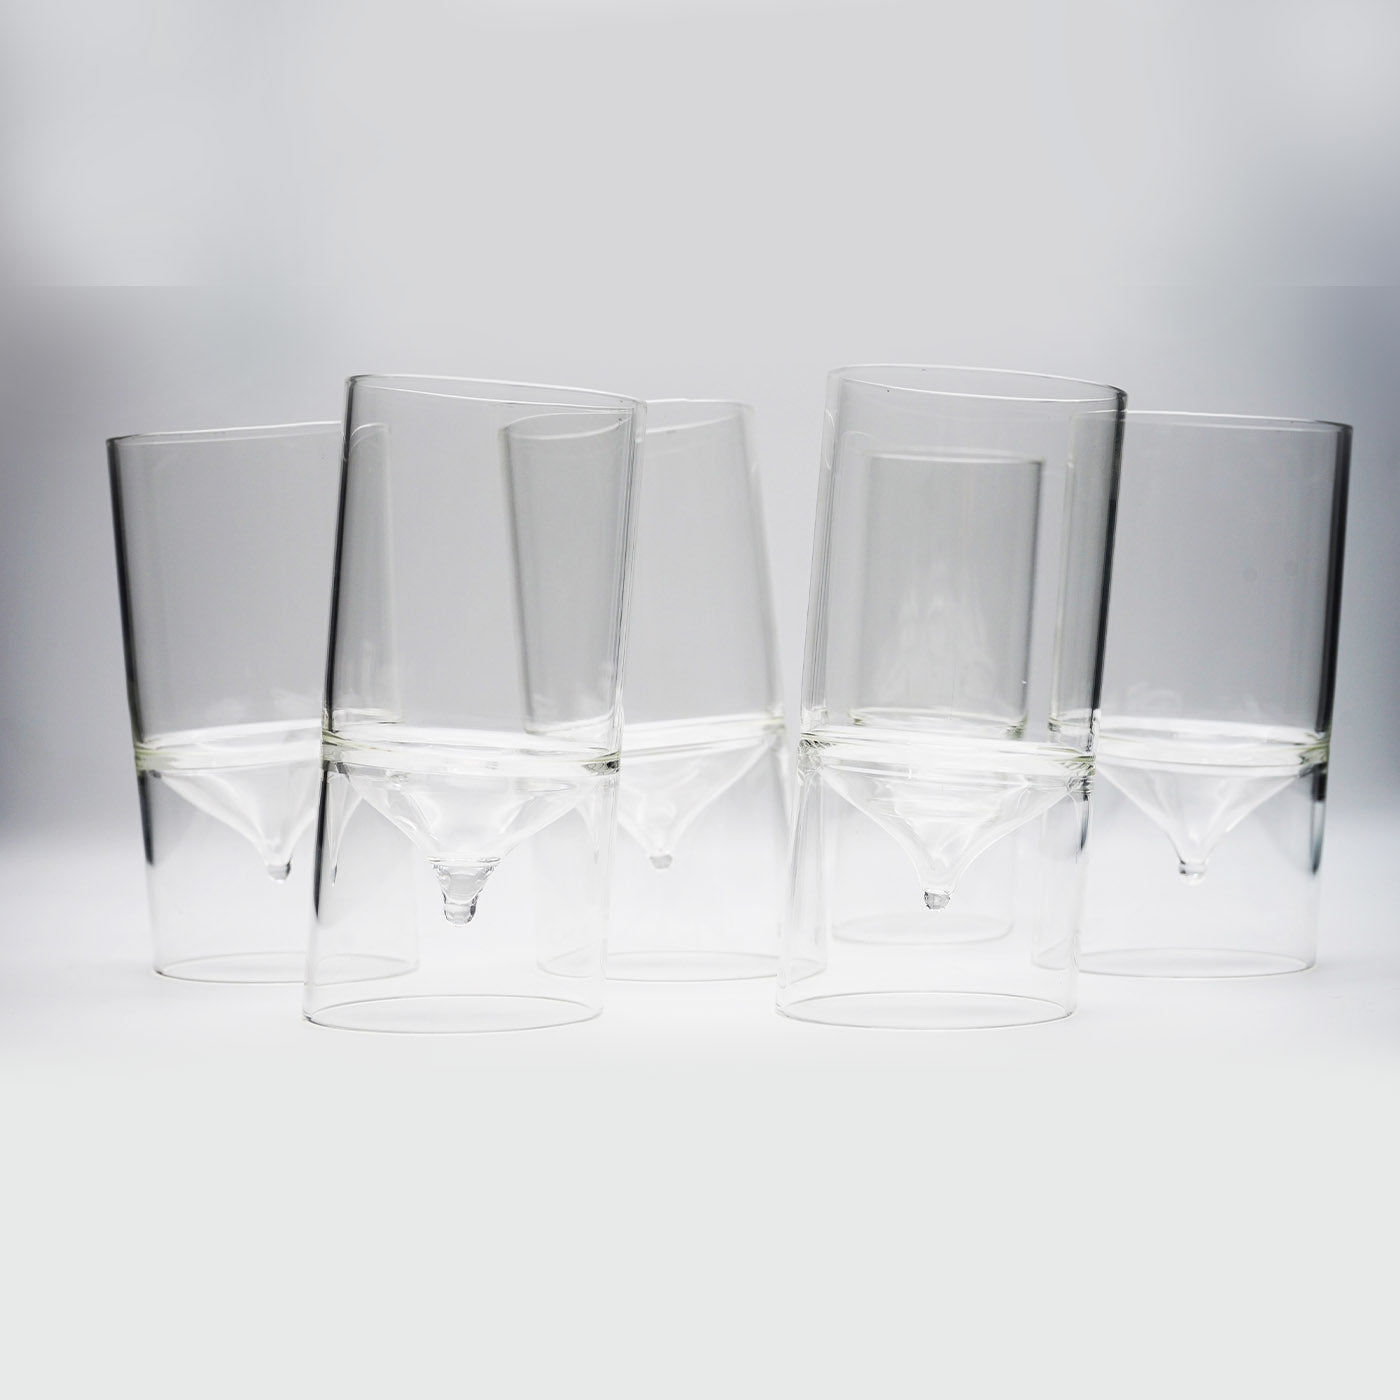 Lido Set of 6 Clear Glasses  - Alternative view 3